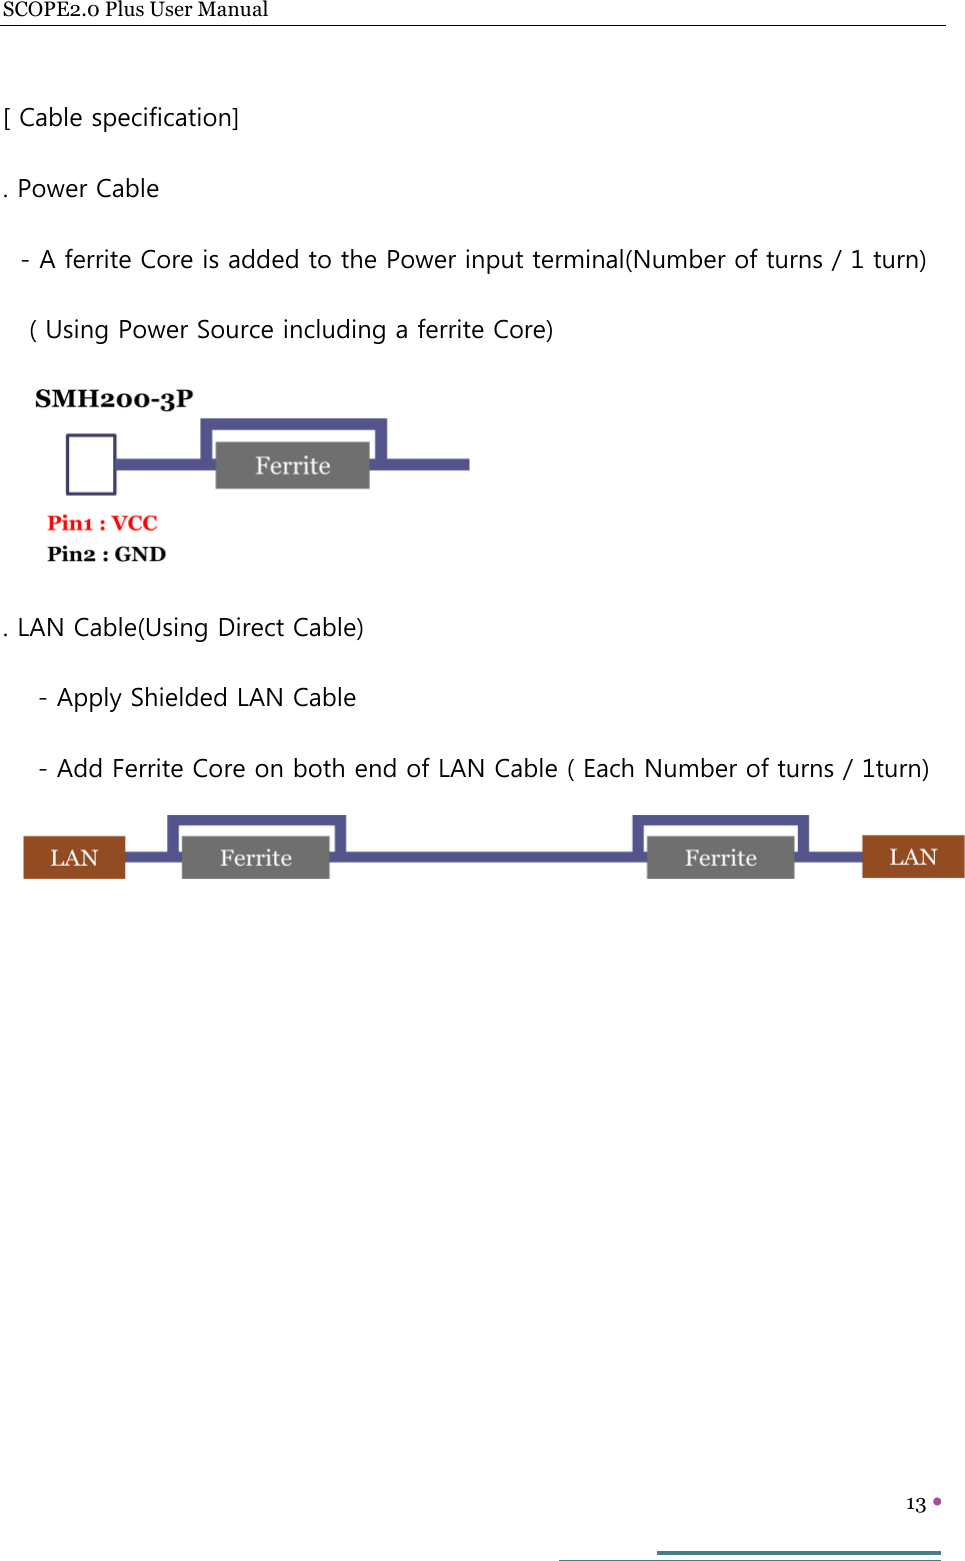 SCOPE2.0 Plus User Manual   13     [ Cable specification] . Power Cable - A ferrite Core is added to the Power input terminal(Number of turns / 1 turn)   ( Using Power Source including a ferrite Core)  . LAN Cable(Using Direct Cable)   - Apply Shielded LAN Cable   - Add Ferrite Core on both end of LAN Cable ( Each Number of turns / 1turn)         